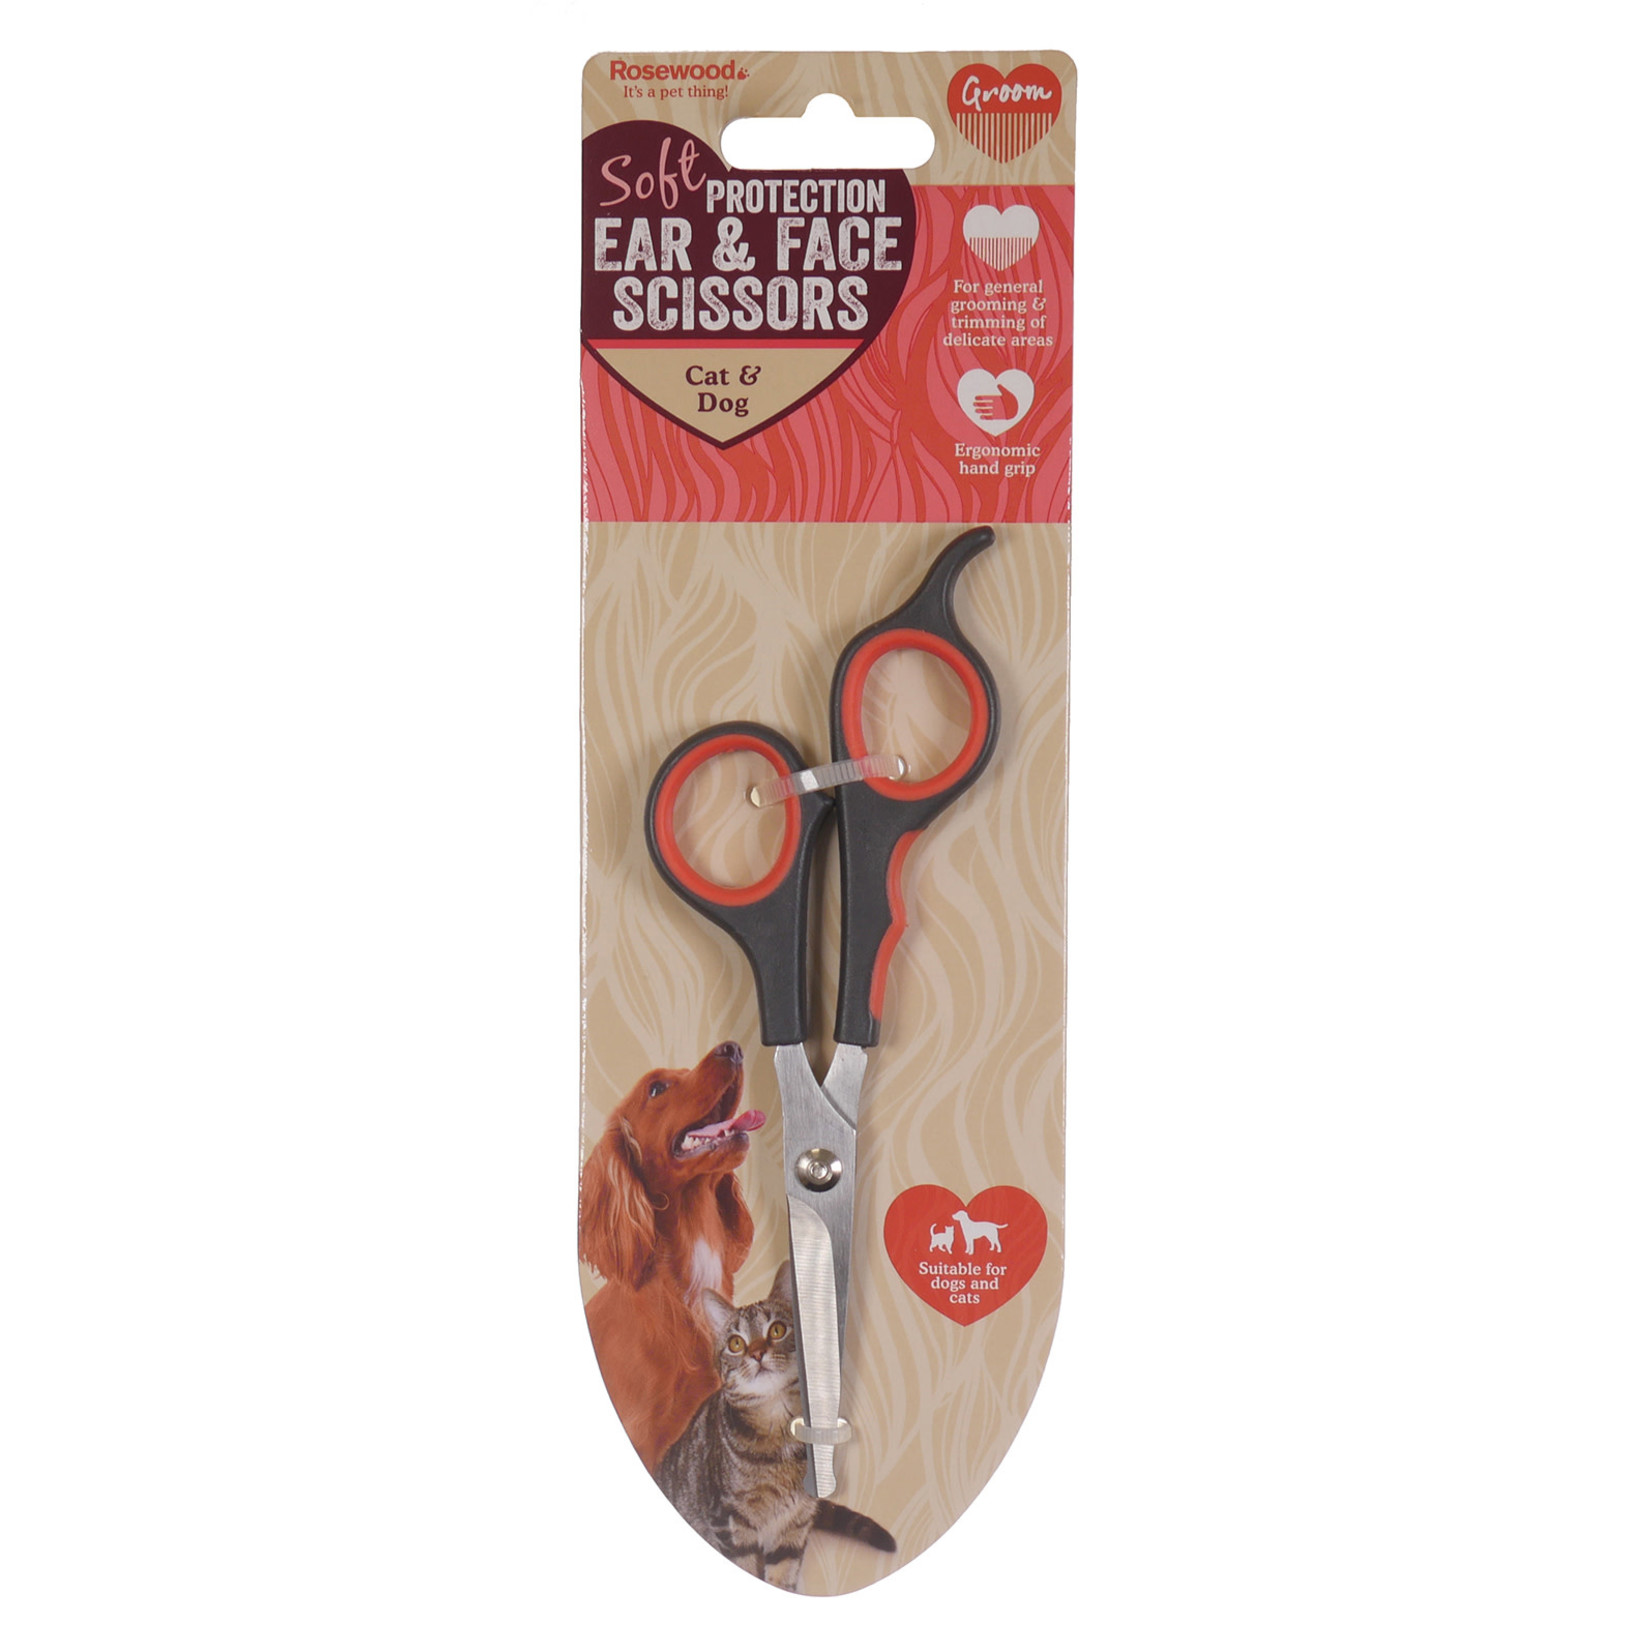 Rosewood Soft Protection Grooming Ear & Face Dog & Cat Scissors